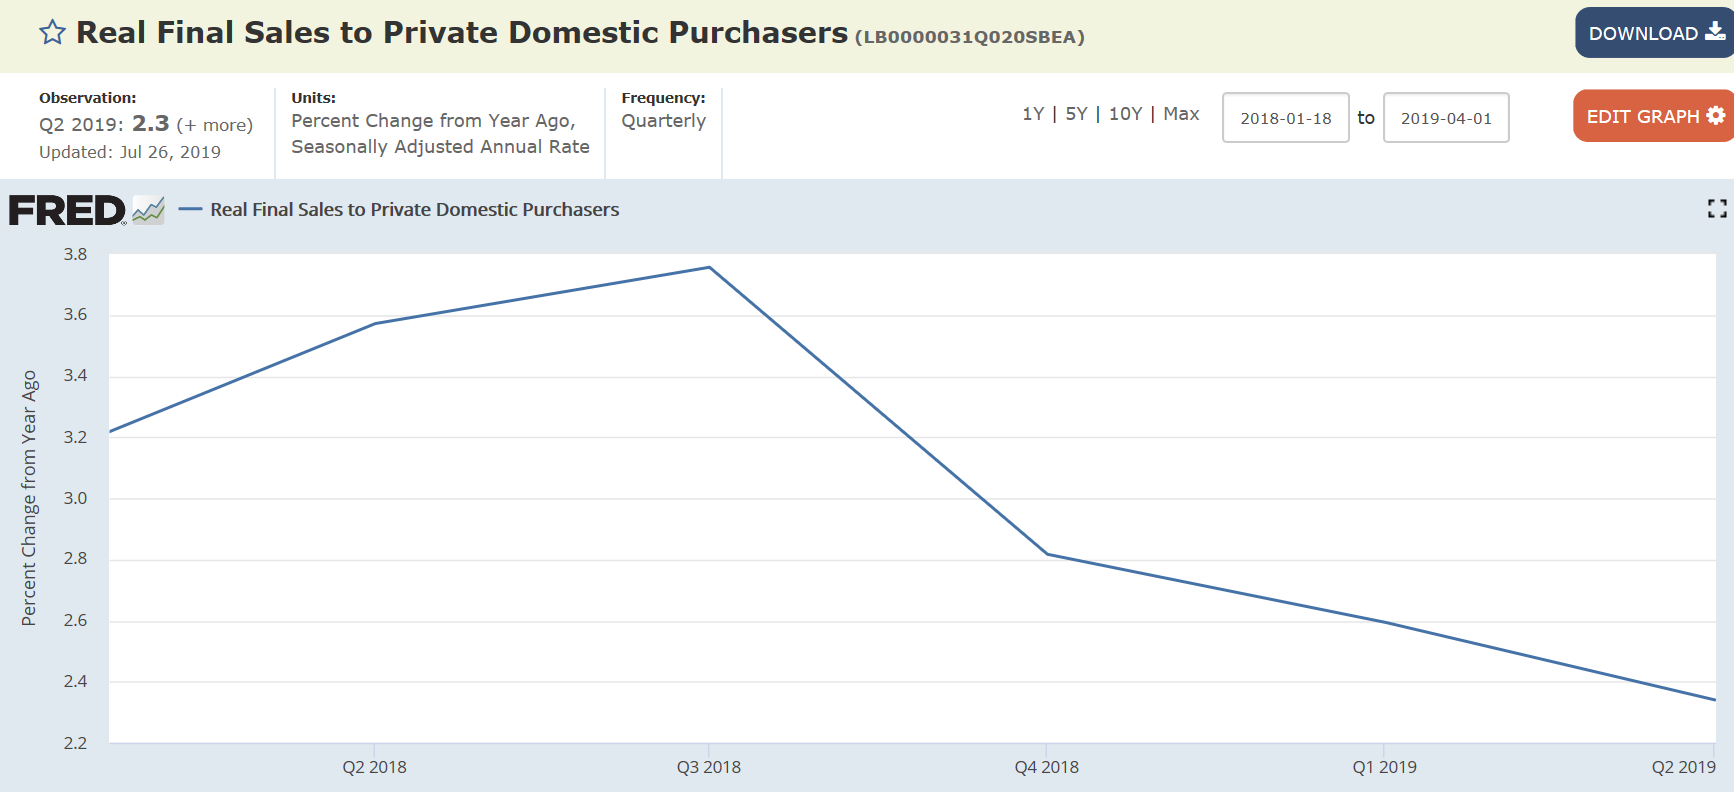 ADP, Chicago PMI, Buy backs, Domestic product sales